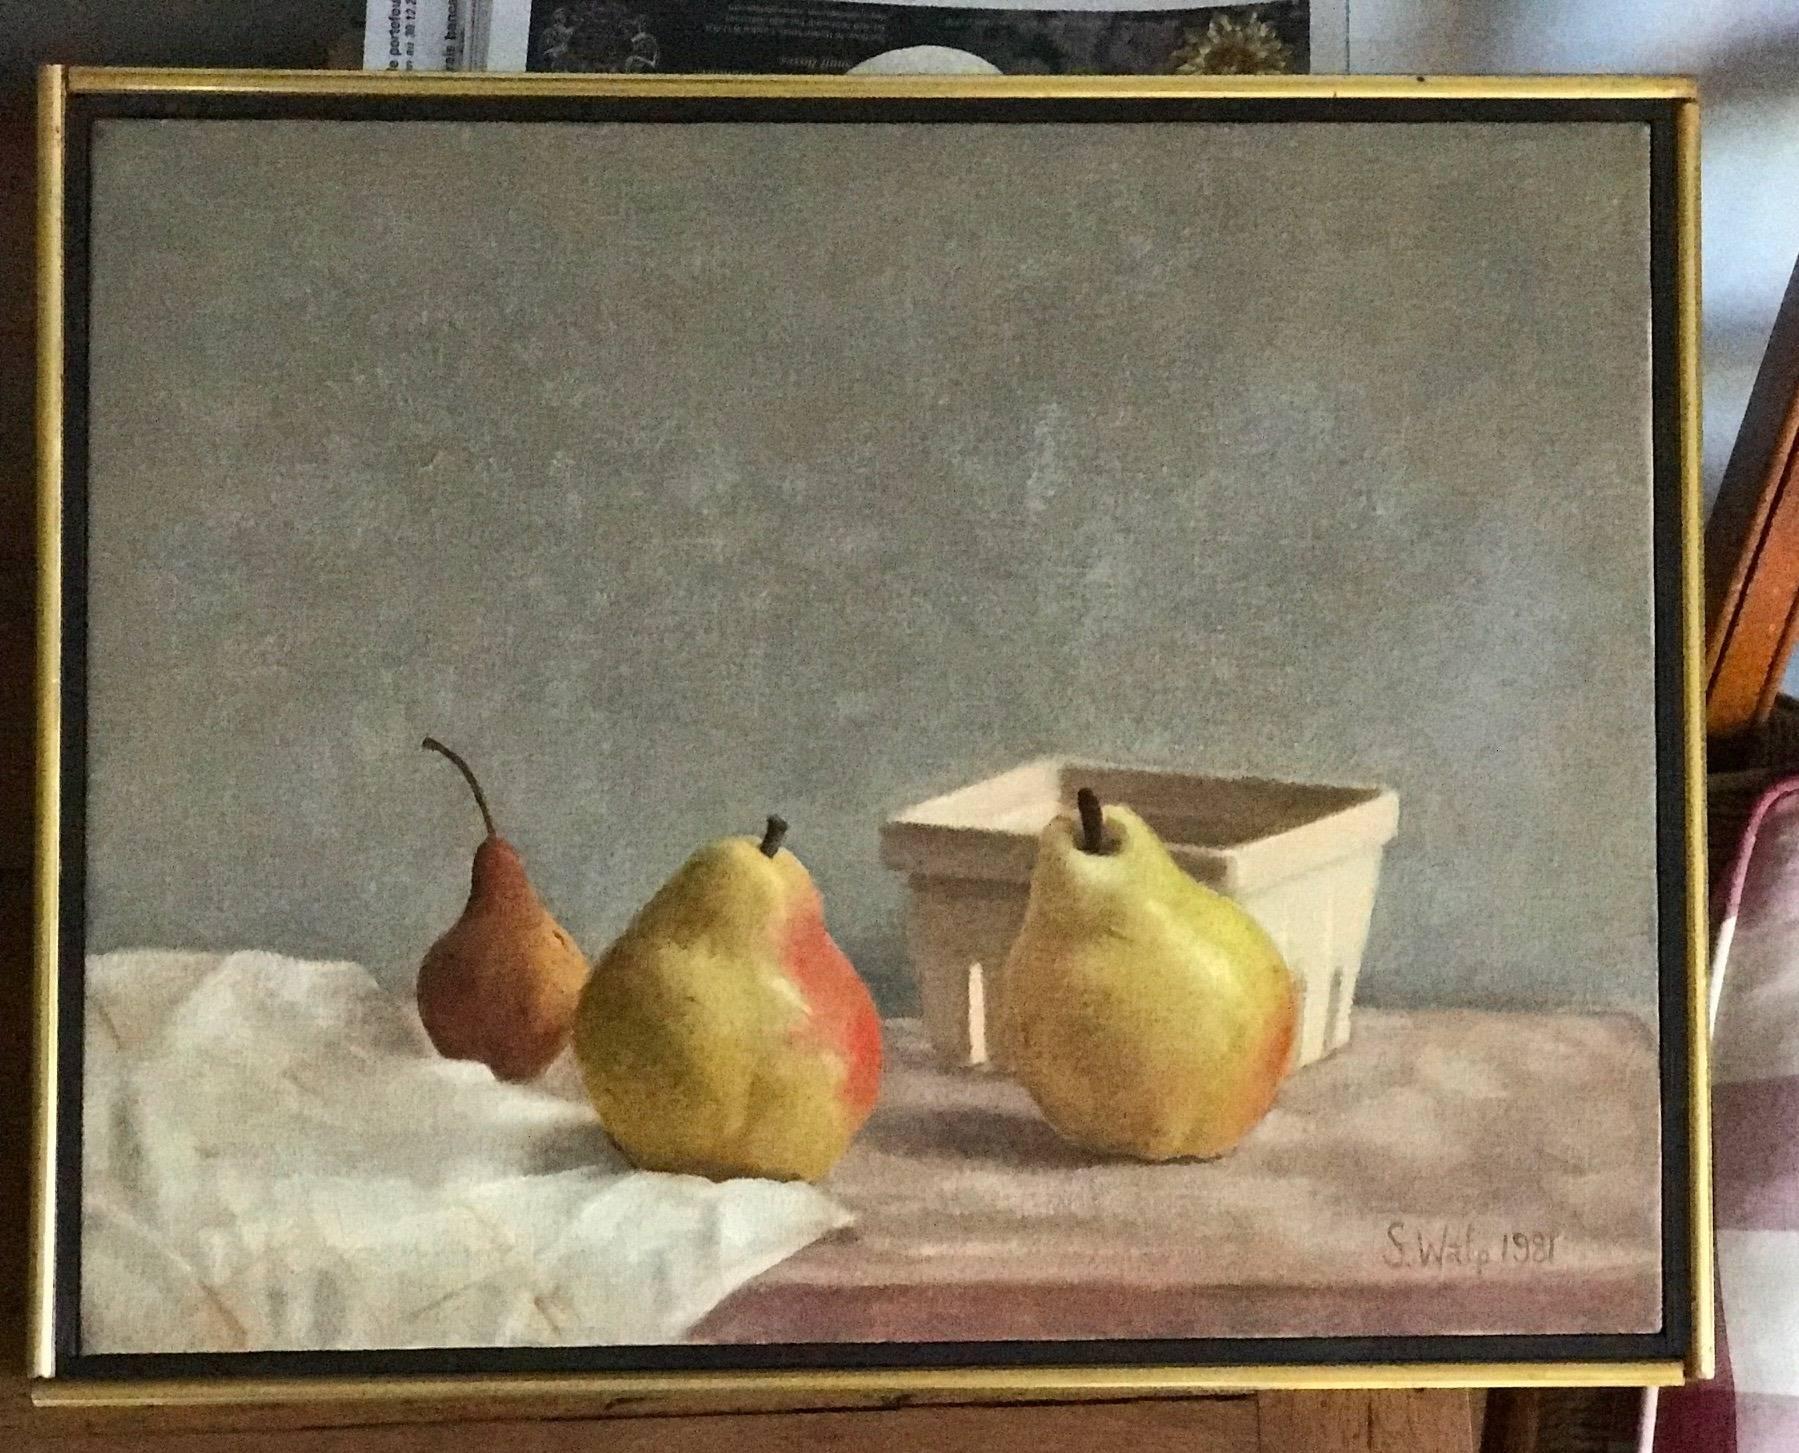 Pears on white cloth - Painting by Susan Walp